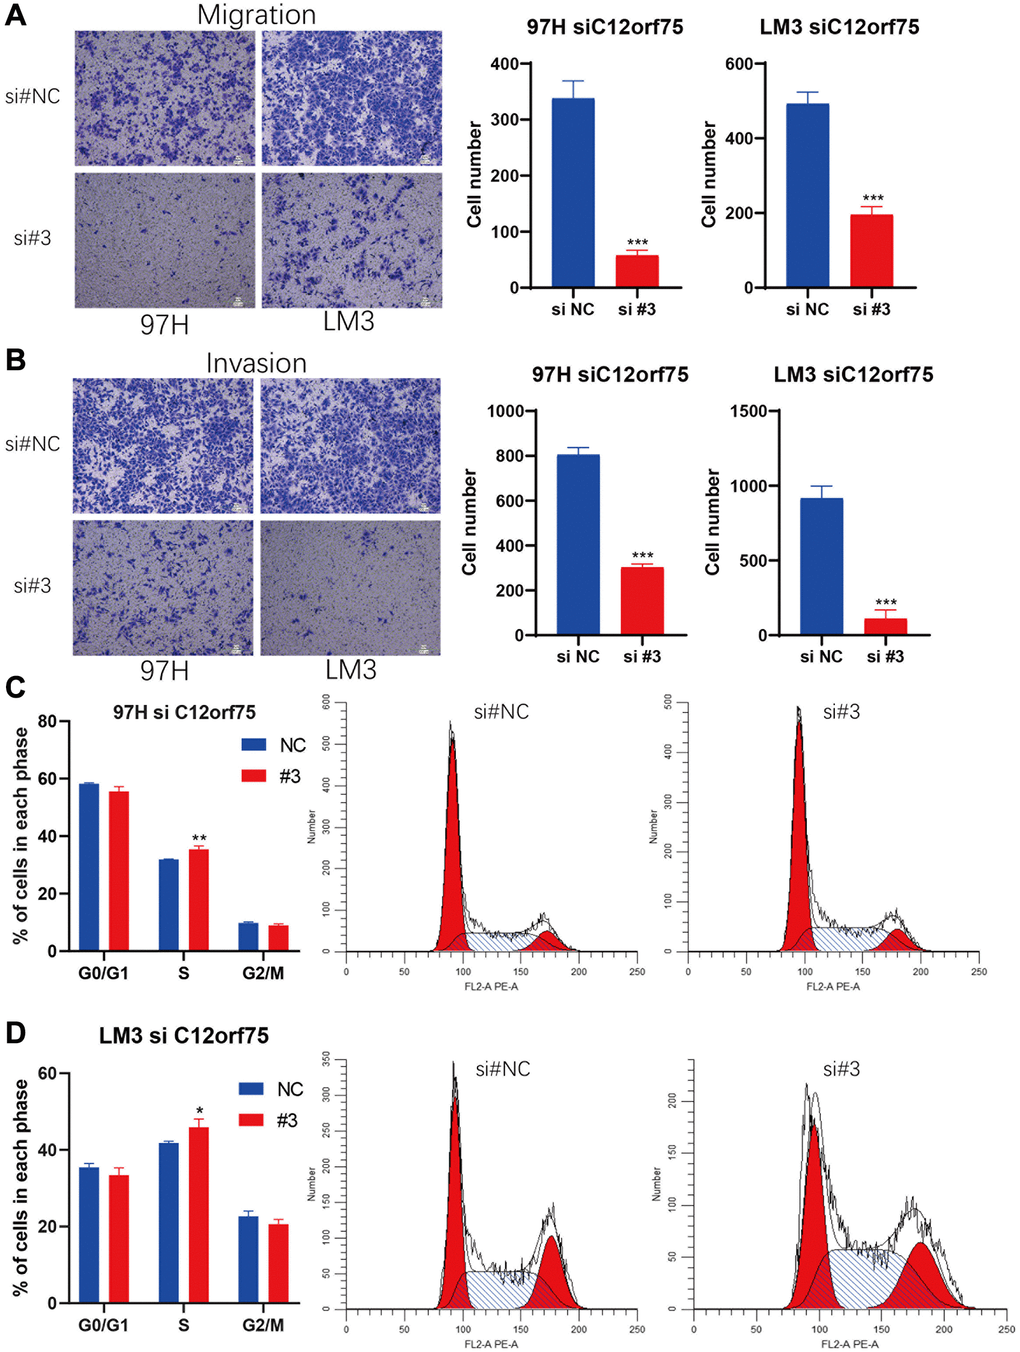 Knockdown of C12orf75 suppresses LIHC cell migration and invasion and arrests cell cycle.C12orf75 silencing suppresses cell migration (A) and invasion (B) of the 97H and LM3 (Scale bar: 200 μm.) and statistical comparisons of the indicated groups were performed. The data presented as mean ± SD from three independent experiments. Flow cytometry indicates that the knockdown of C12orf75 suppresses S to G2 transition in 97H (C) and LM3 (D) cells. *p **p ***p 